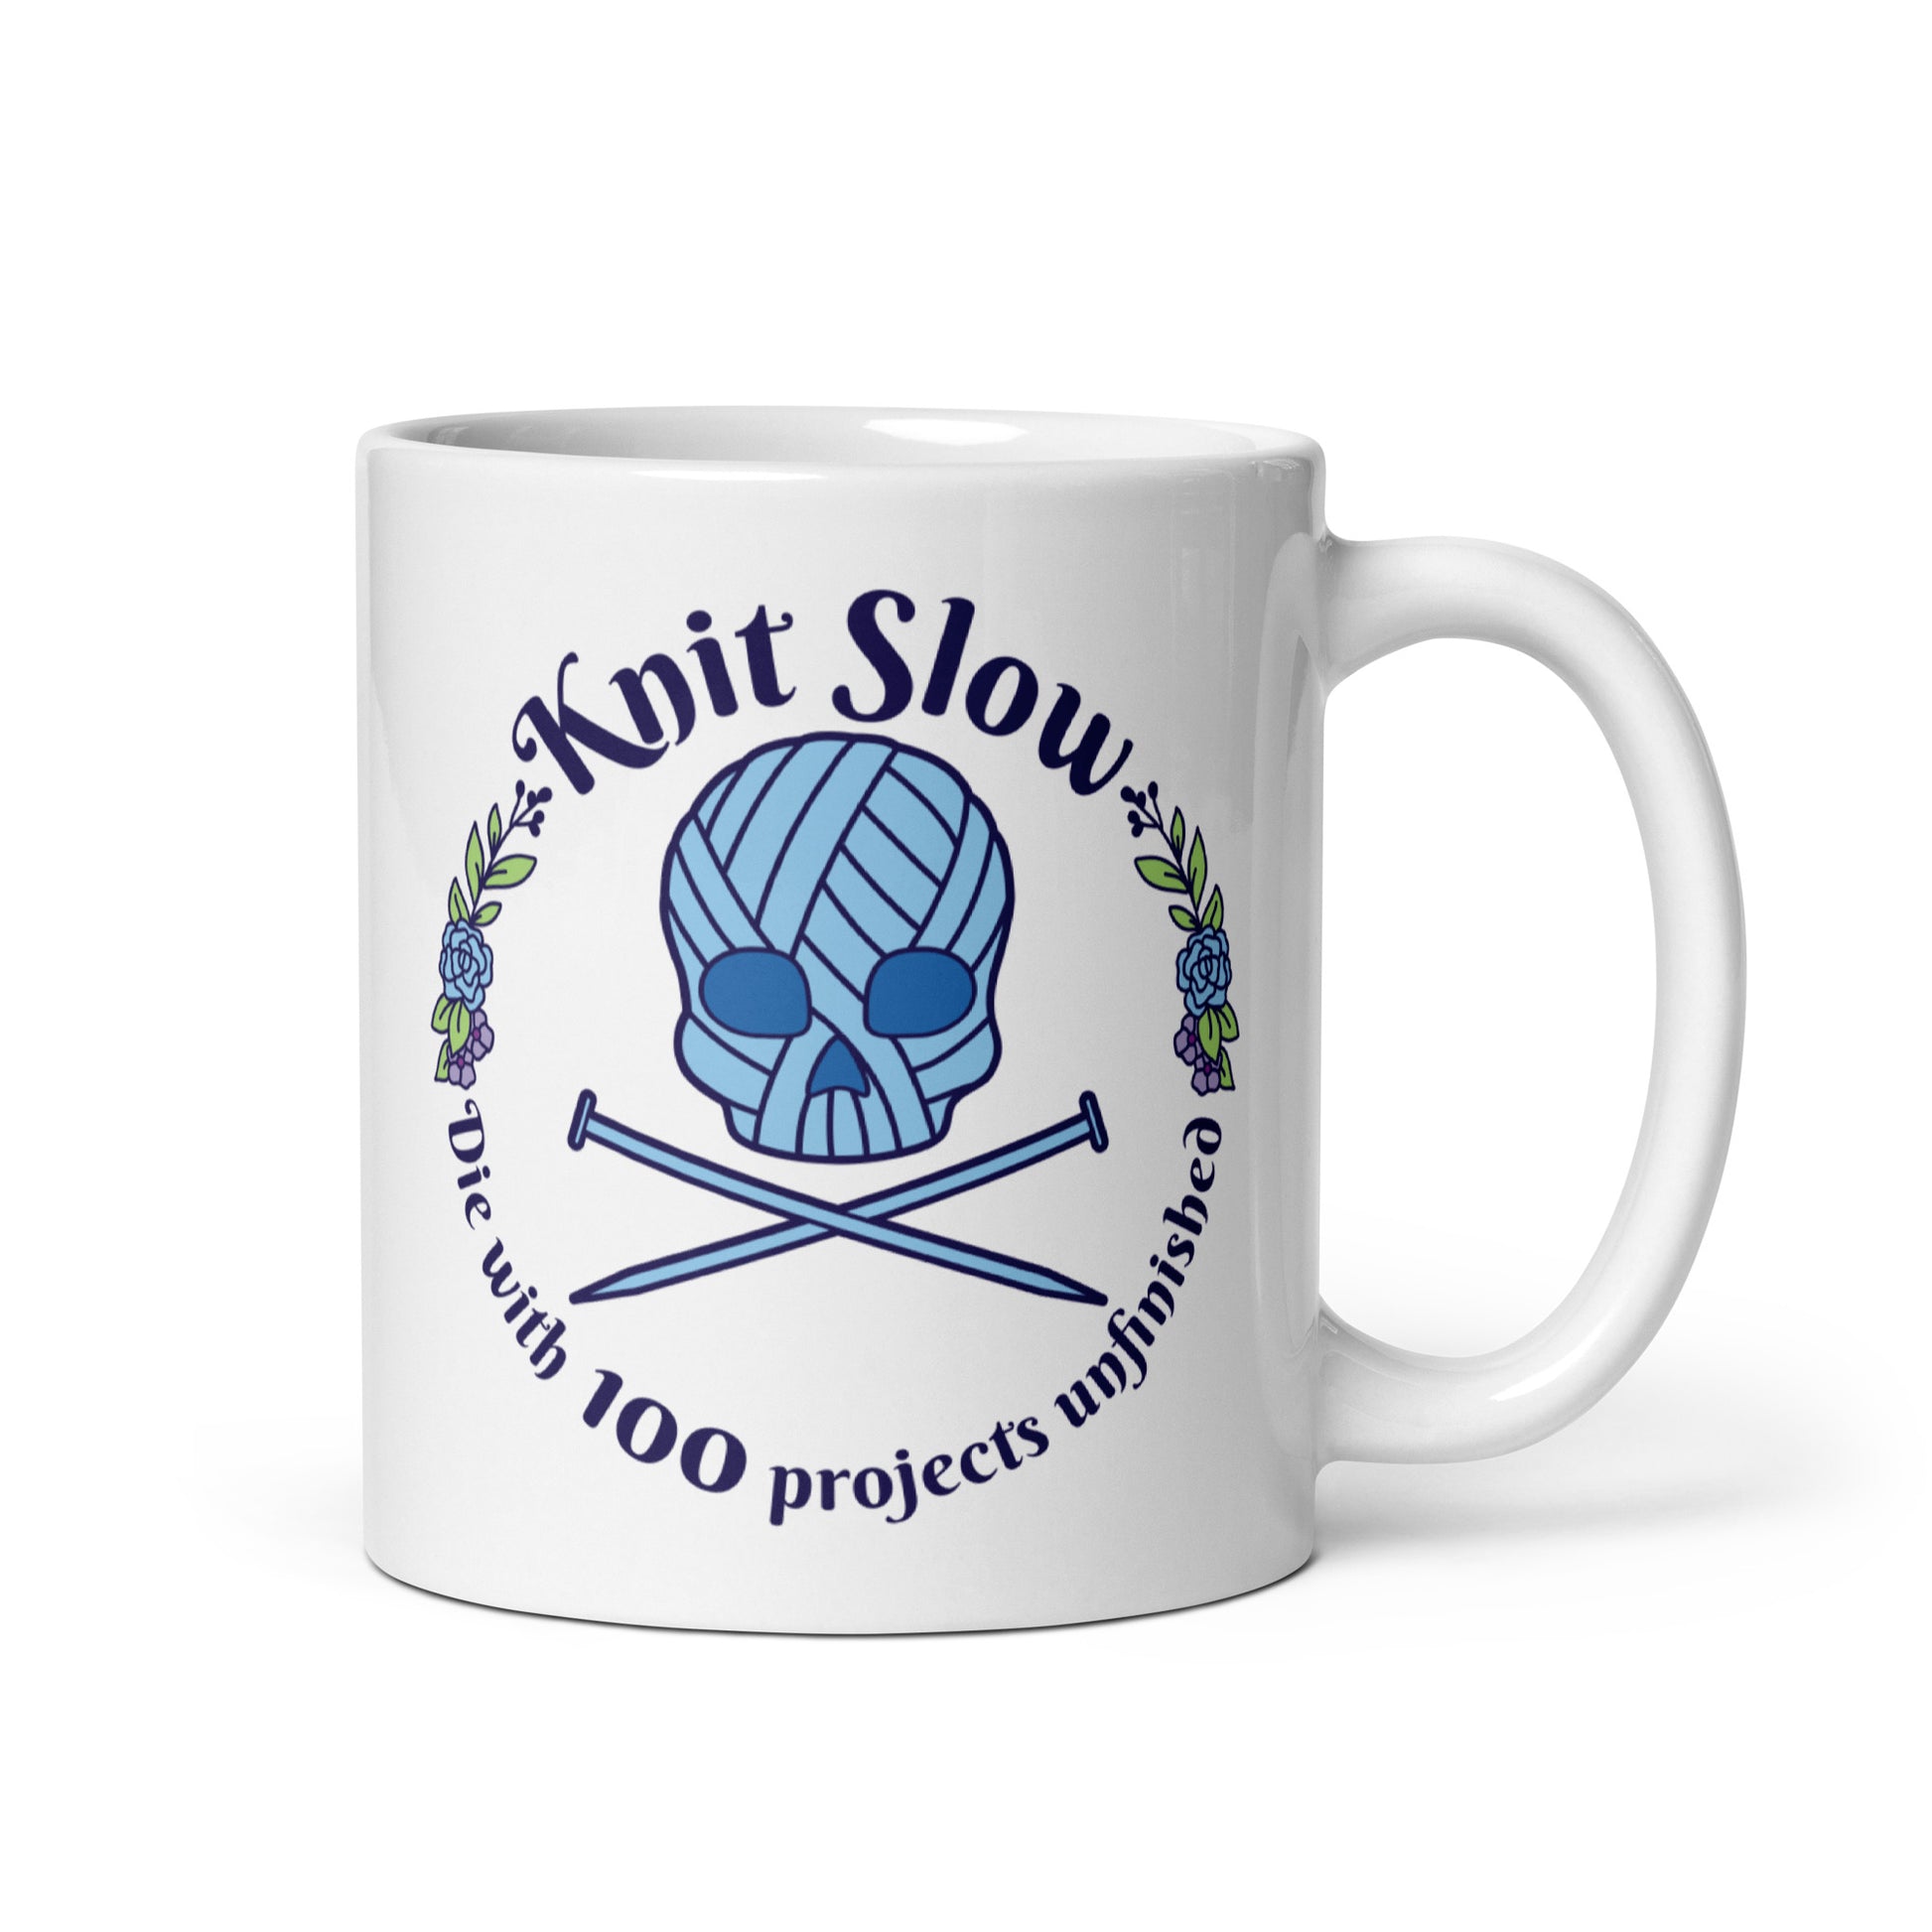 A white 11 ounce ceramic mug featuring an image of a skull and crossbones made of yarn and knitting needles. A floral wreath surrounds the skull, along with words that read "Knit Slow, Die with 100 projects unfinished"